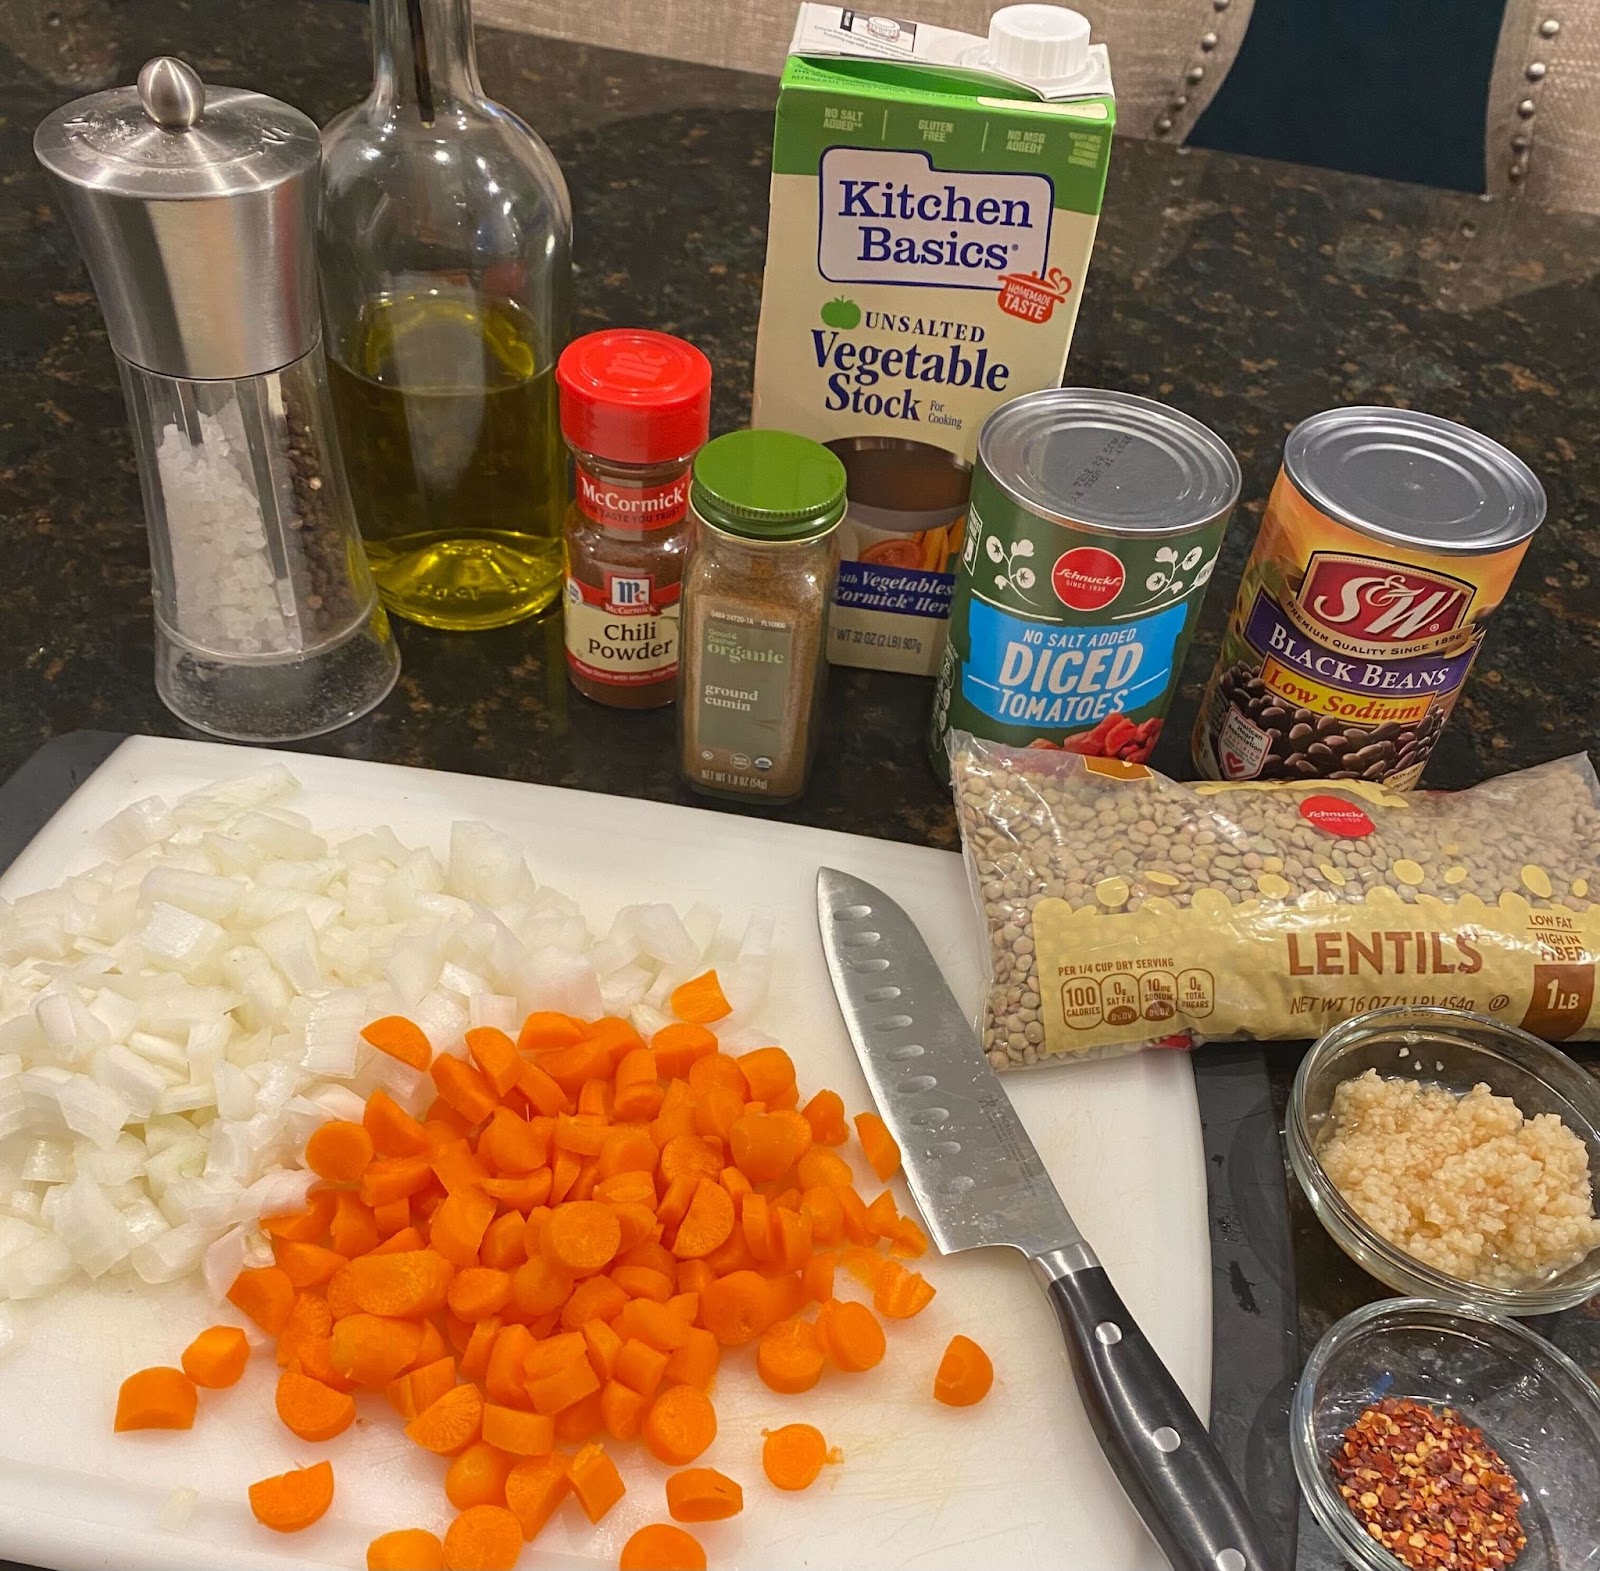 Ingredients for Protein Packed Black Bean and Lentil Soup, a heart-healthy recipe prepared by Jen from Advantia Health. 